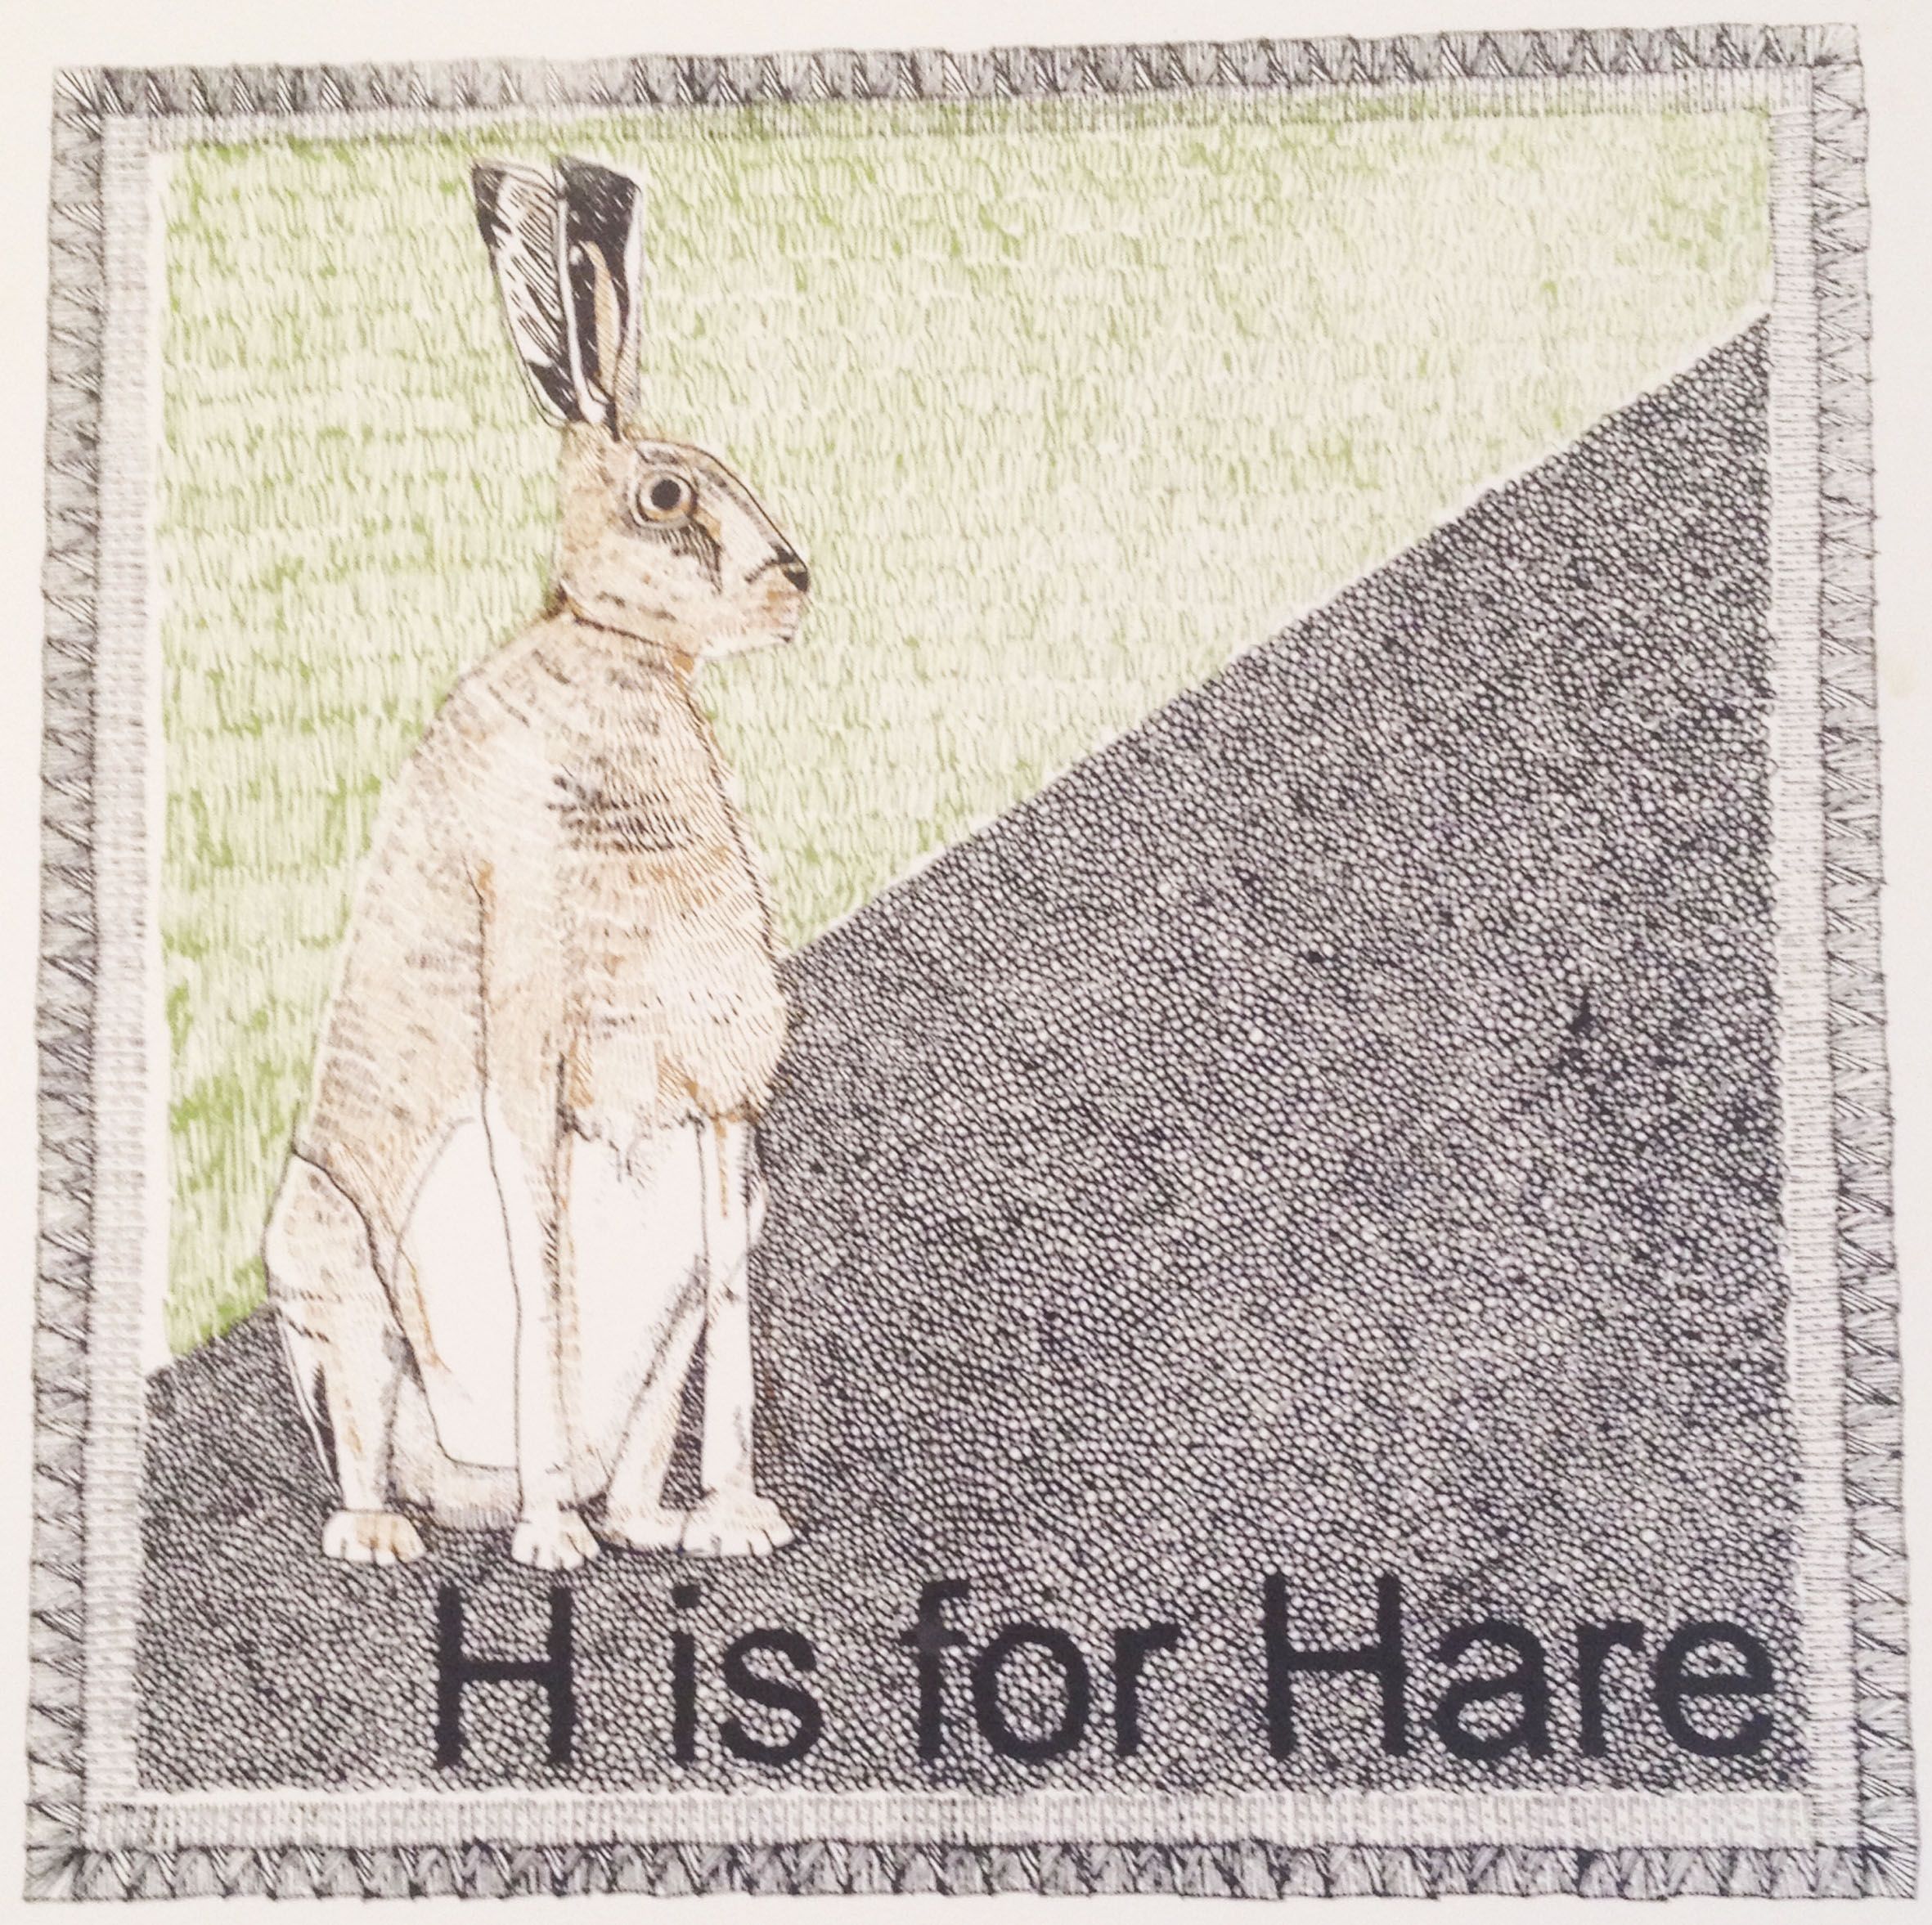 H is for Hare by Clare Halifax